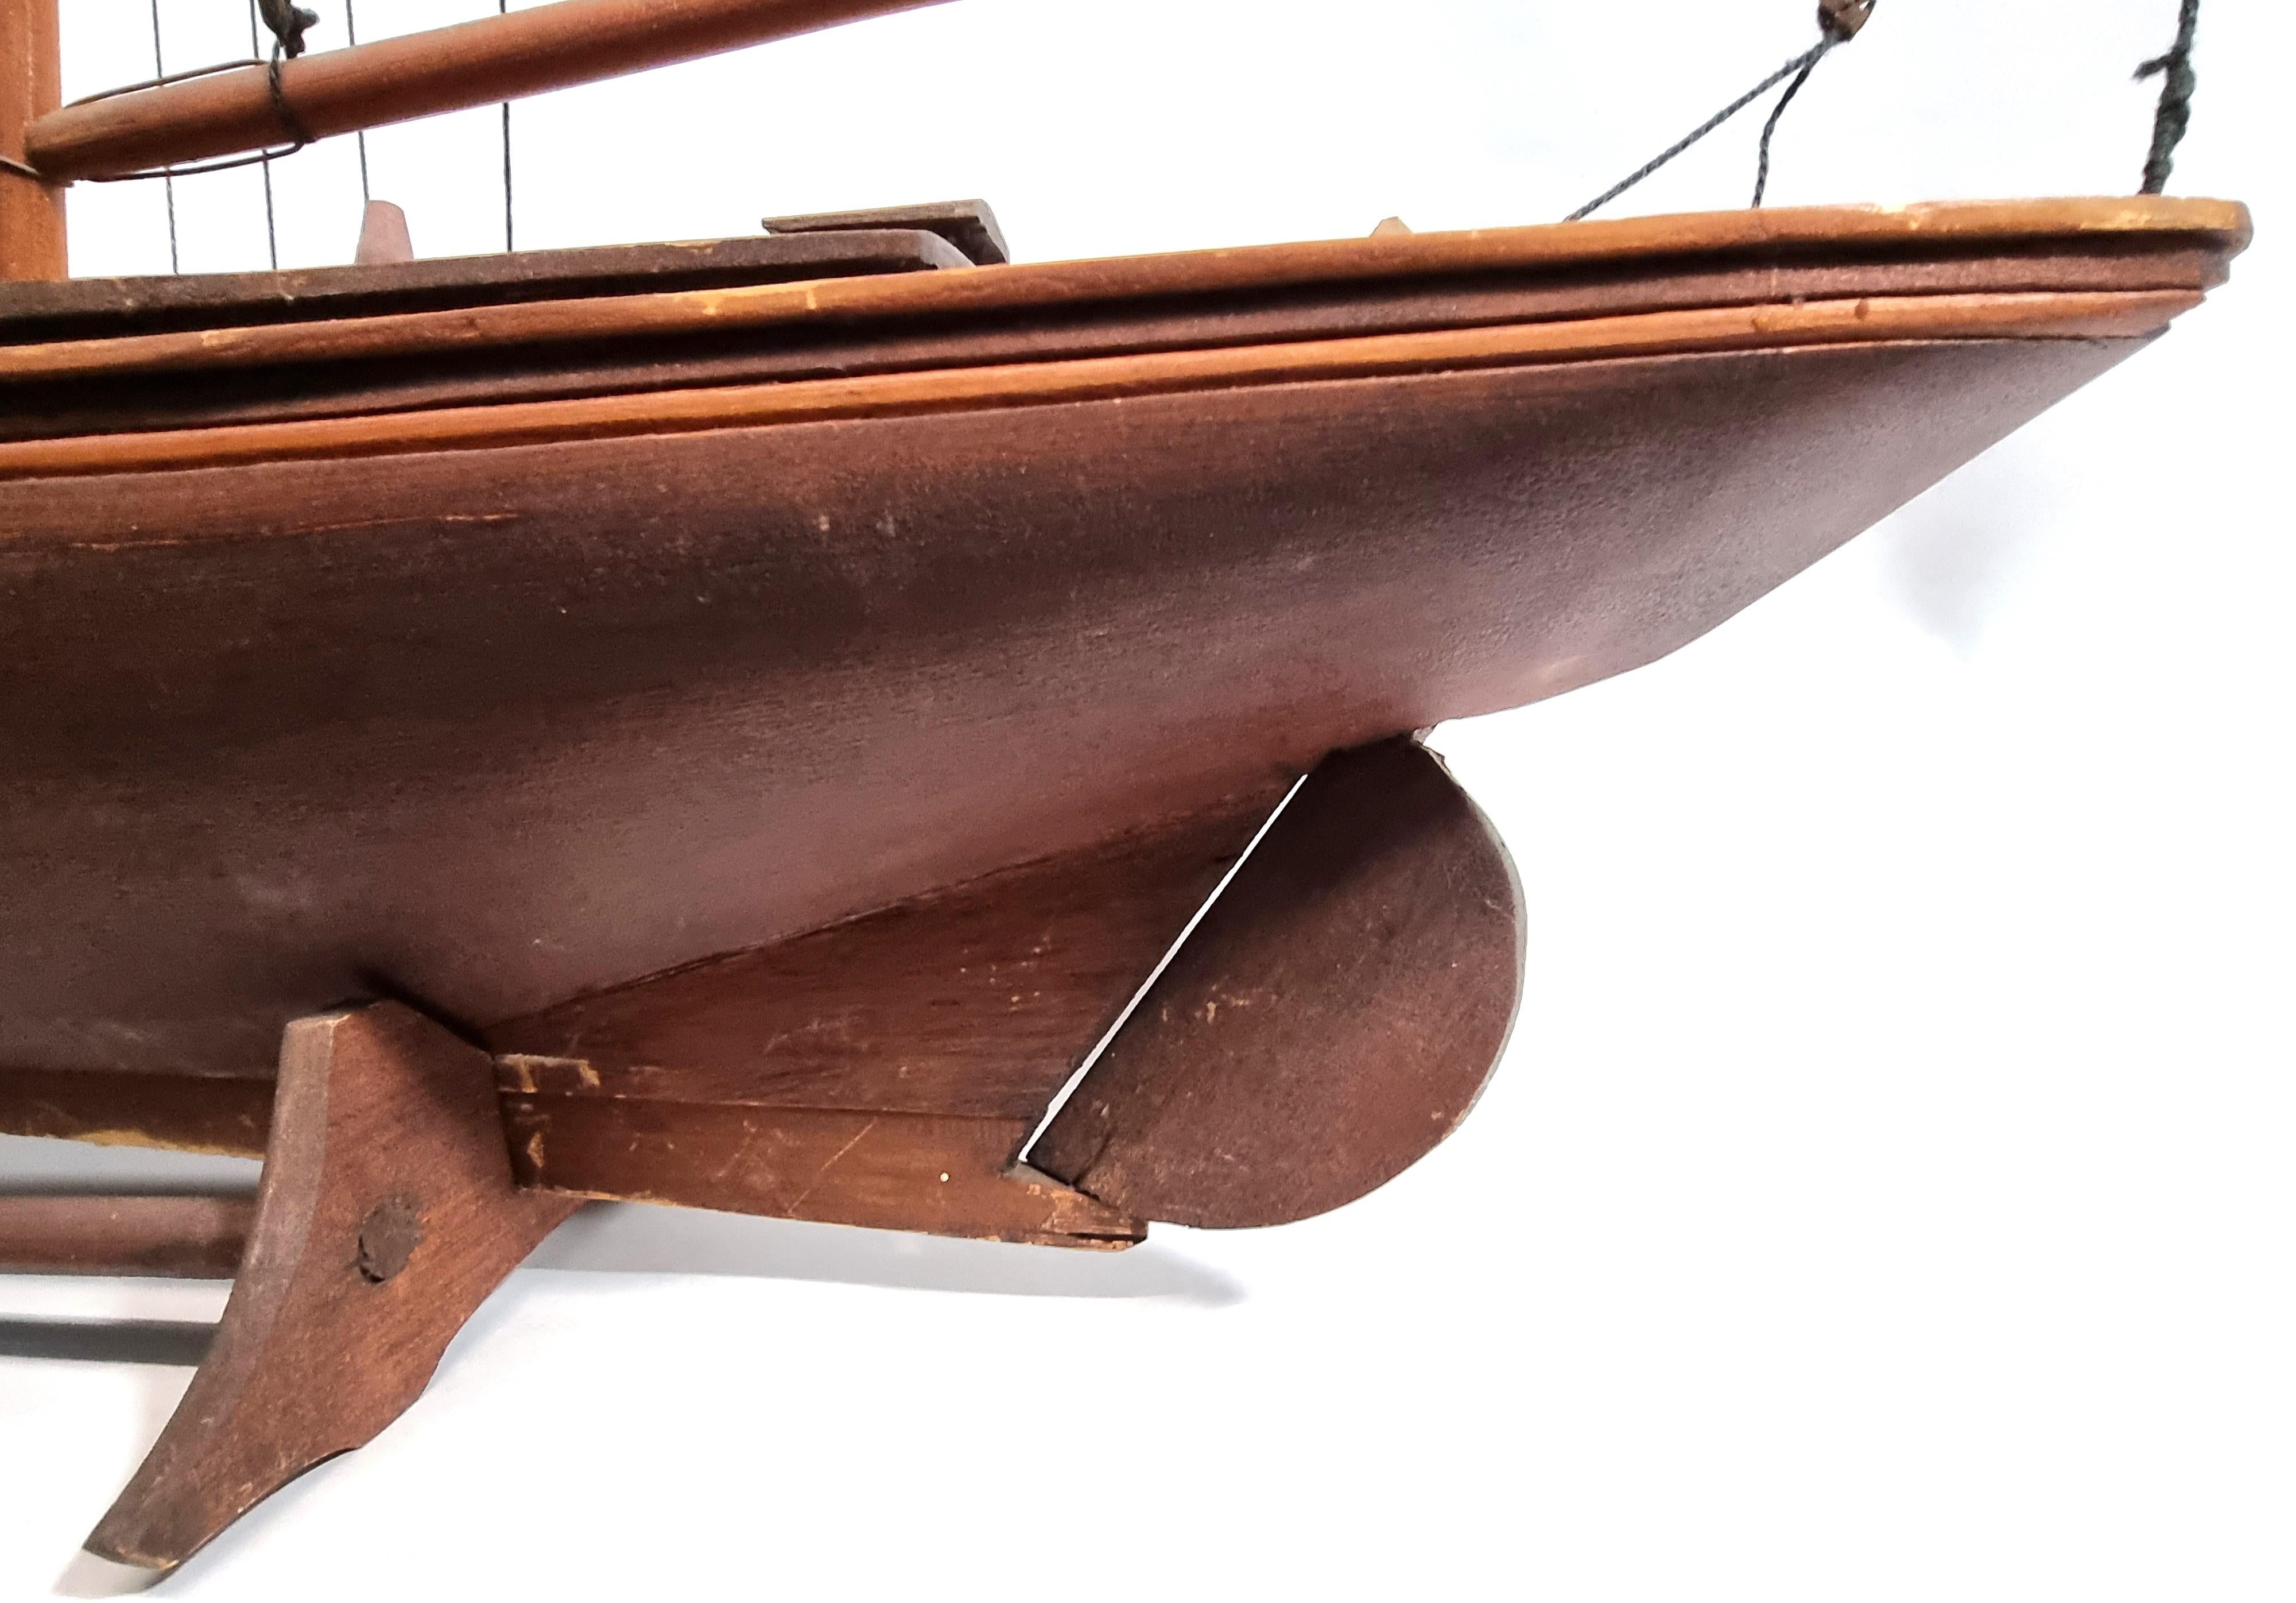 Eugene Leclerc Bluenose Ship Model
Eugene Leclerc, Canadian, (1885-1968)

Handsomely handmade model of The Bluenose created by Saint-Jean-Port-Joli, Quebec artist Eugene Leclerc likely during the 1940's, appears to have all original rigging and